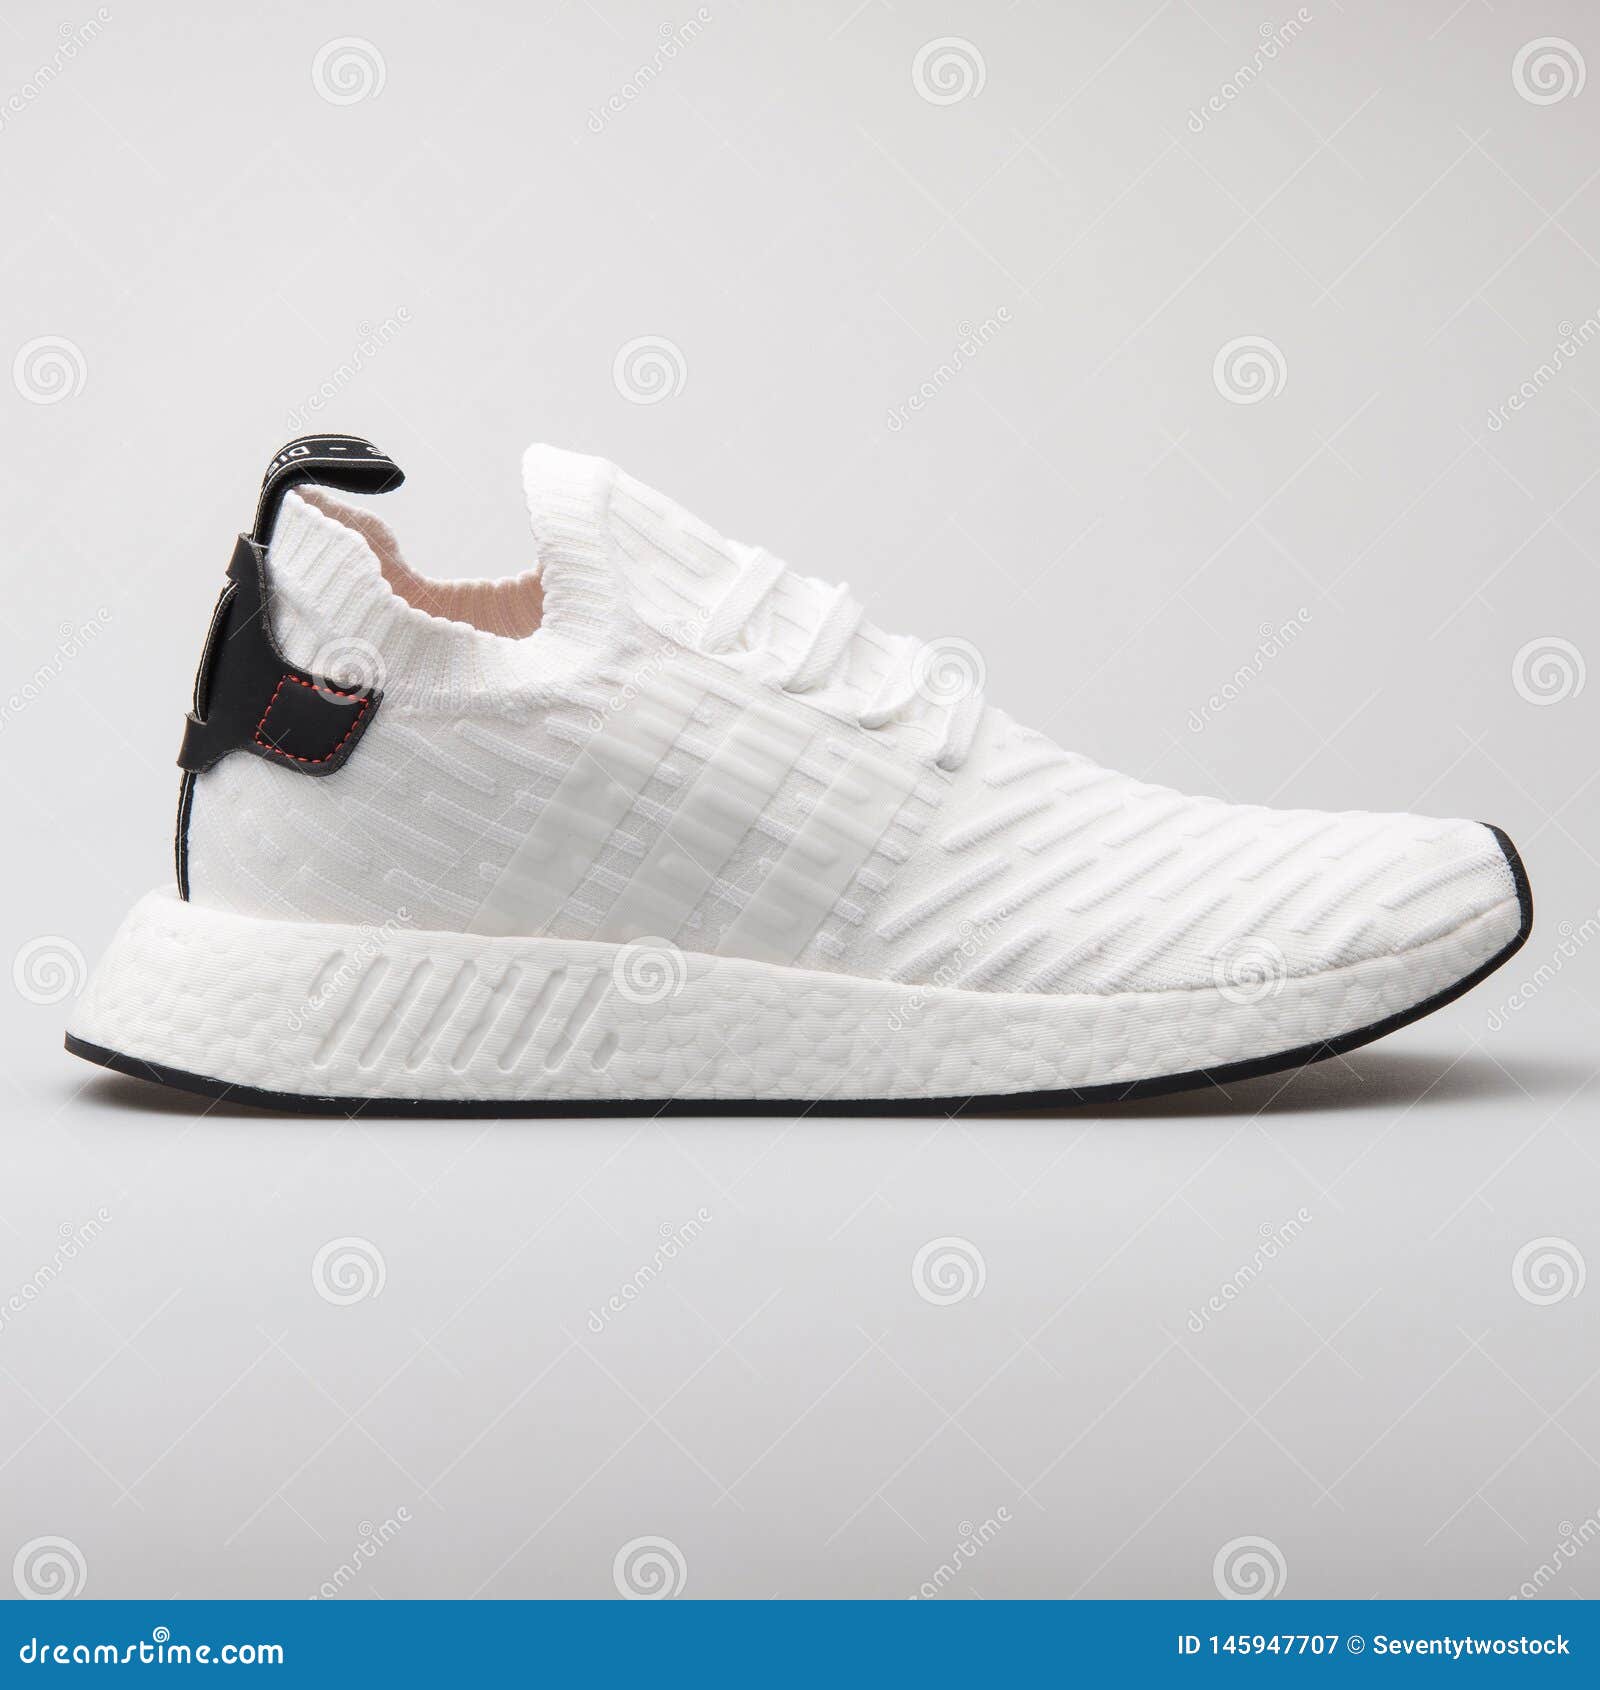 Adidas NMD R2 PK White Sneaker Editorial - Image of accessories, exercise: 145947707